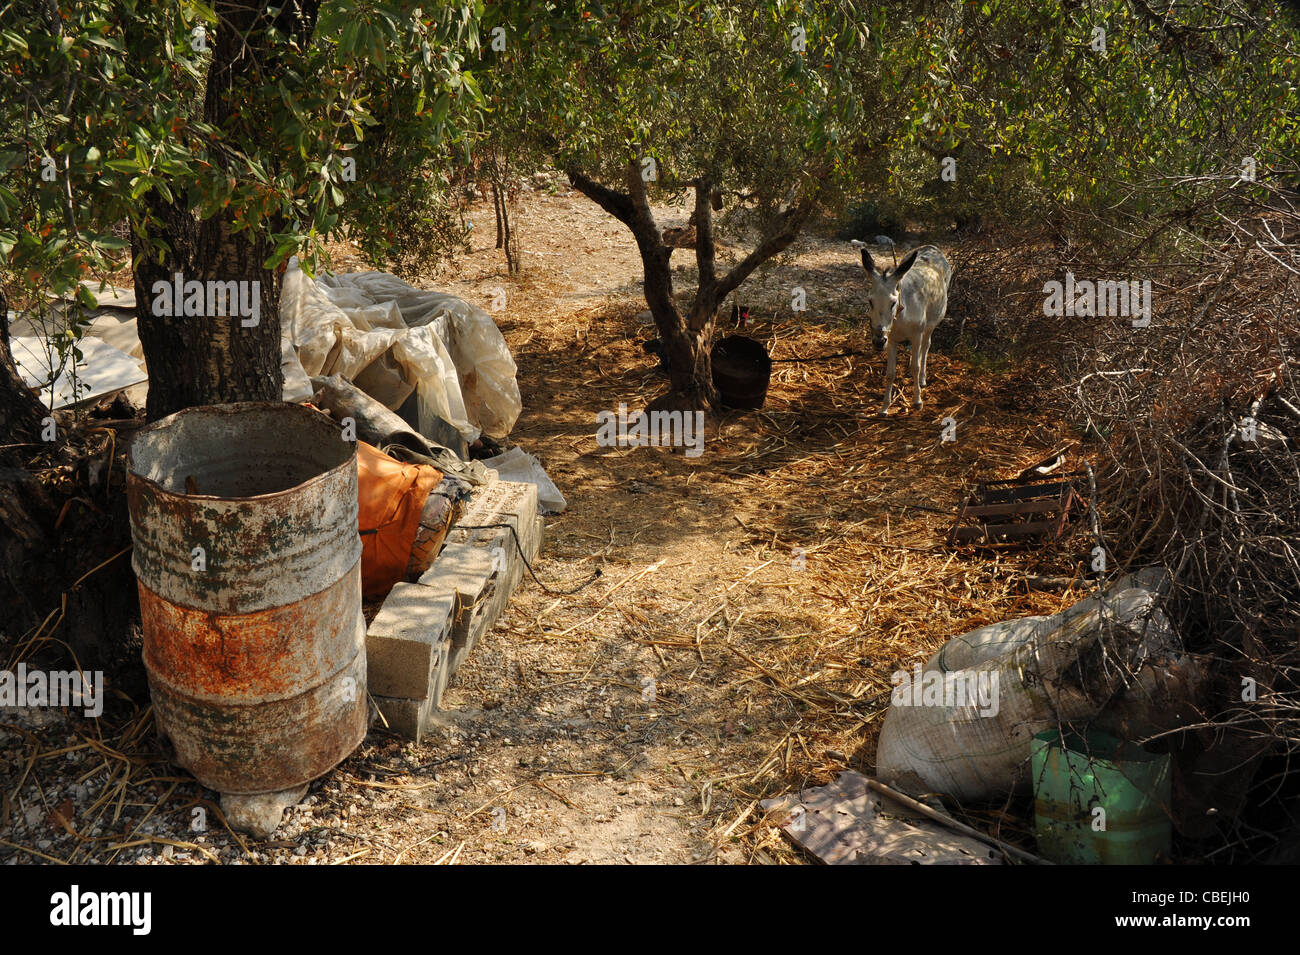 The Palestinian villages around Naplouse, impoverished by the Israeli colonies., A donkey in the middle of bags and tins Stock Photo